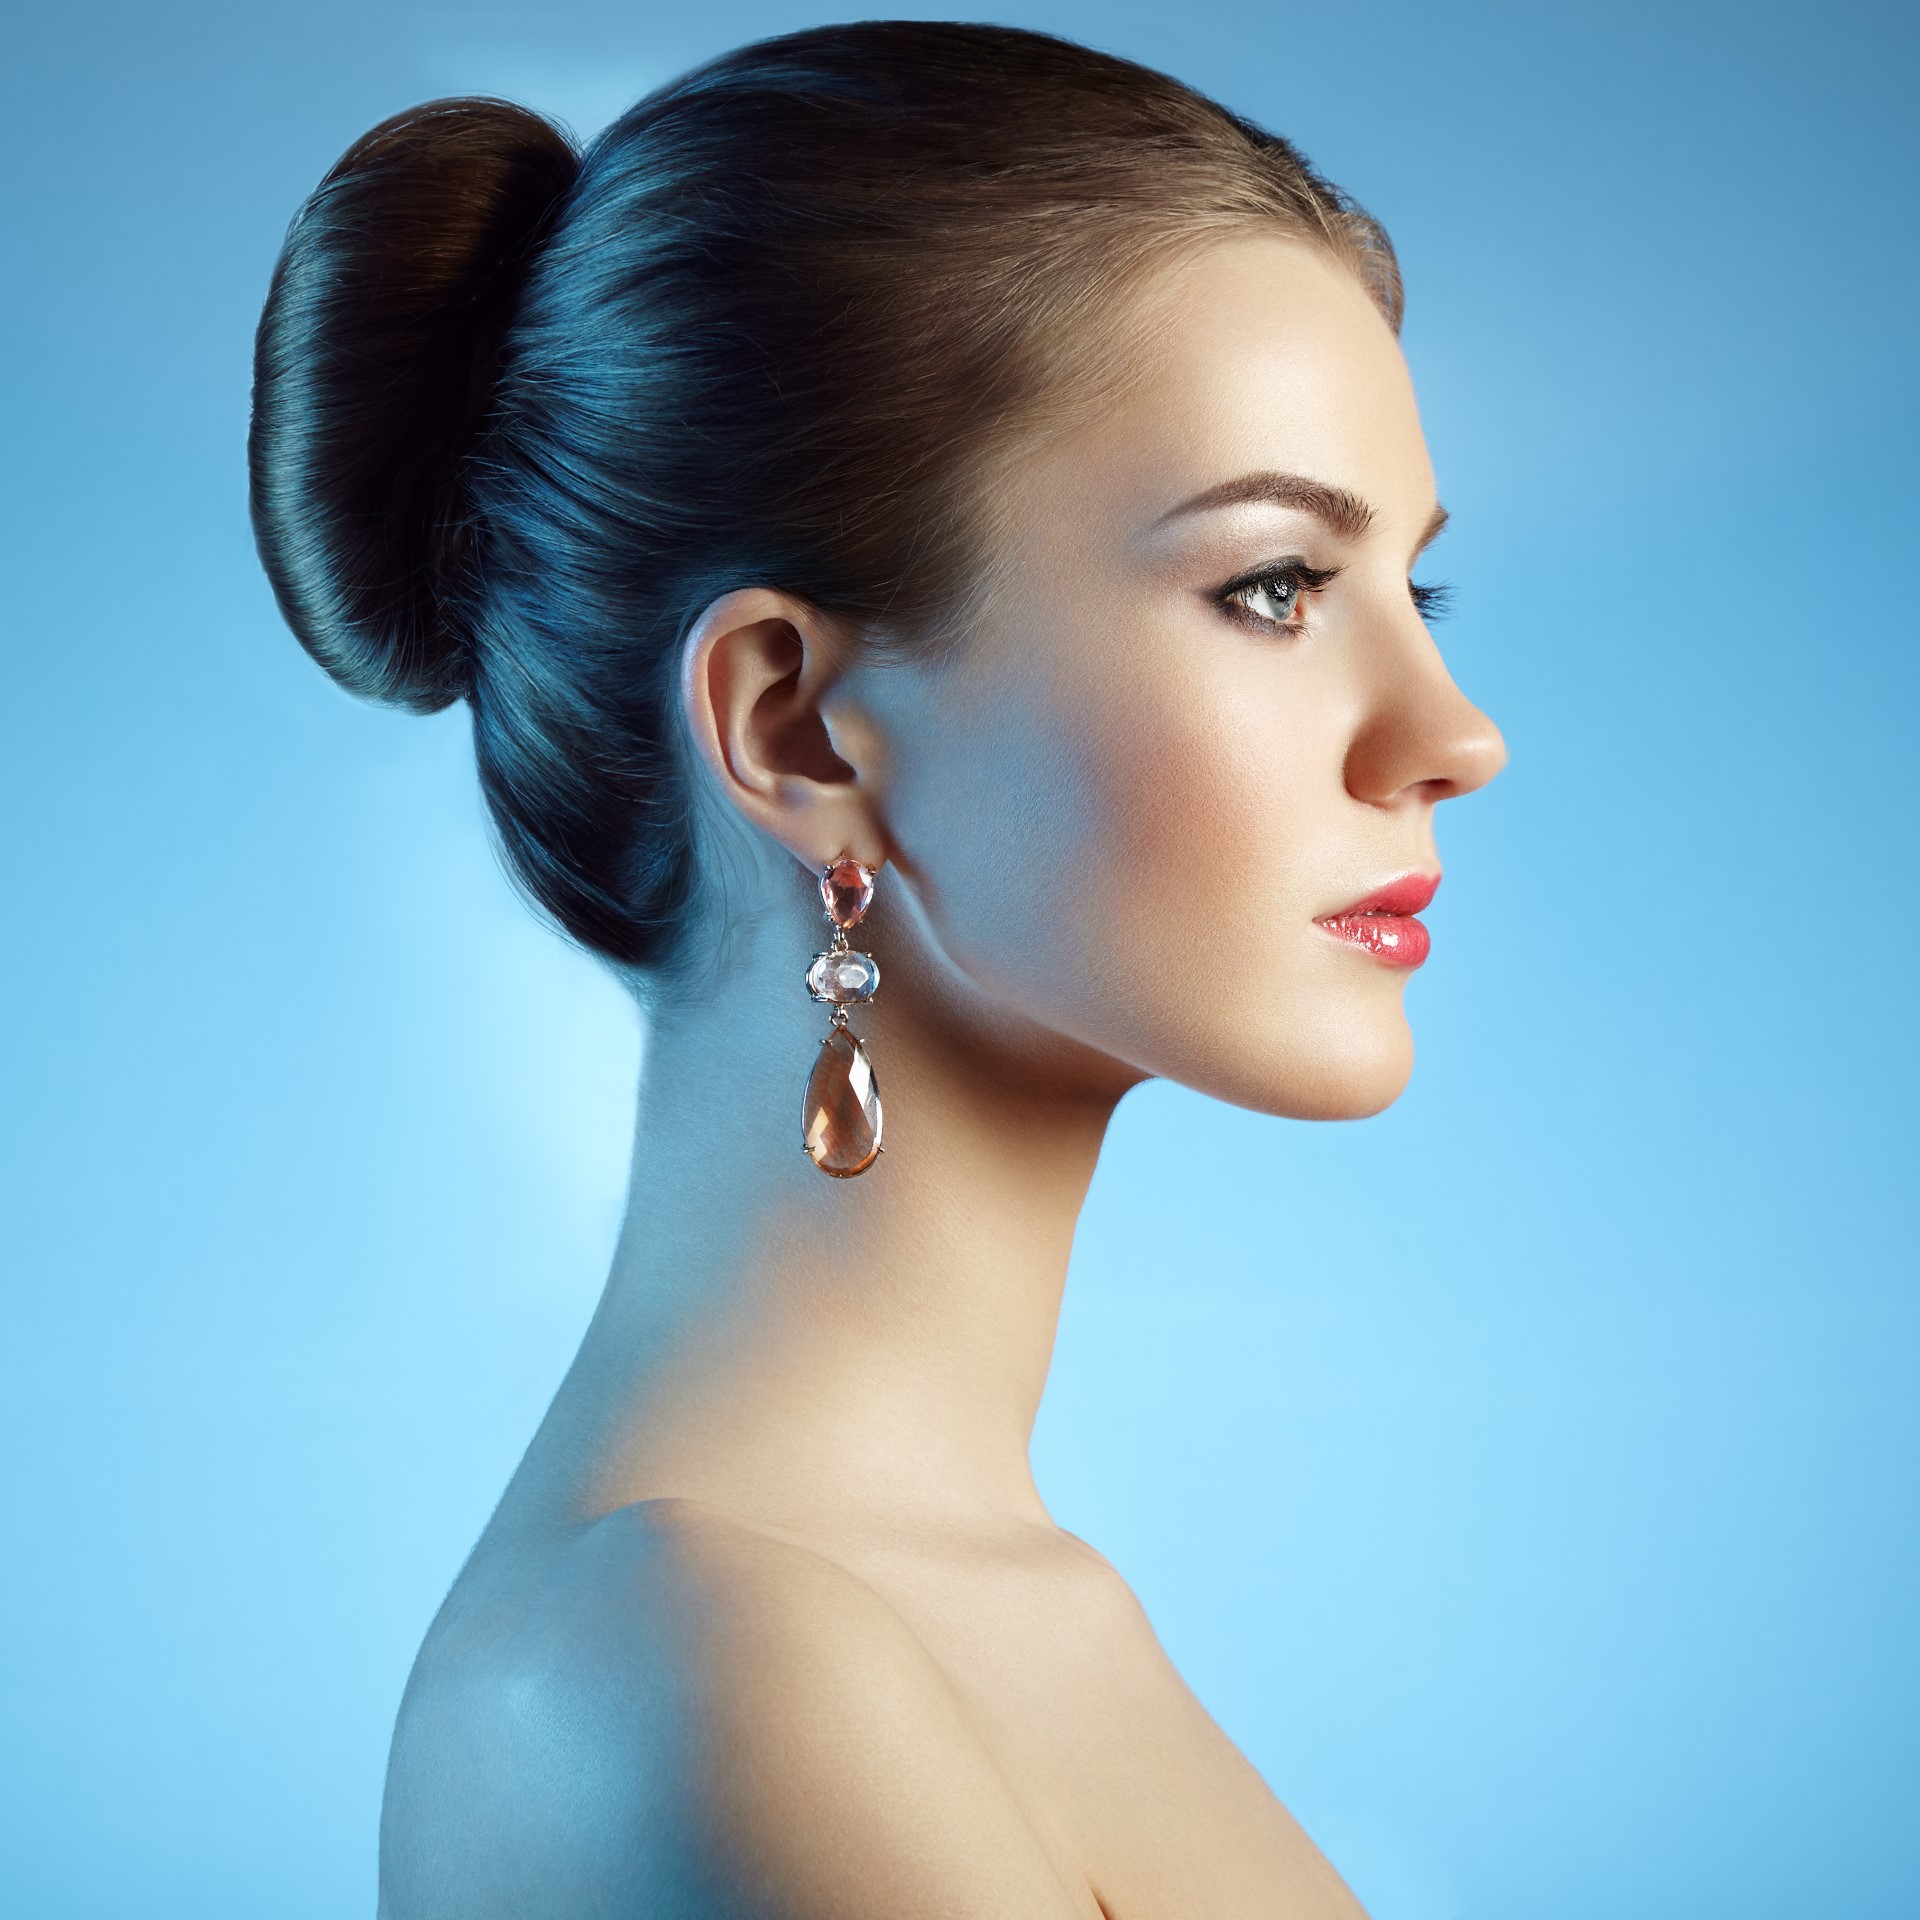 Portrait Of Beautiful Sensual Woman With Elegant Hairstyle